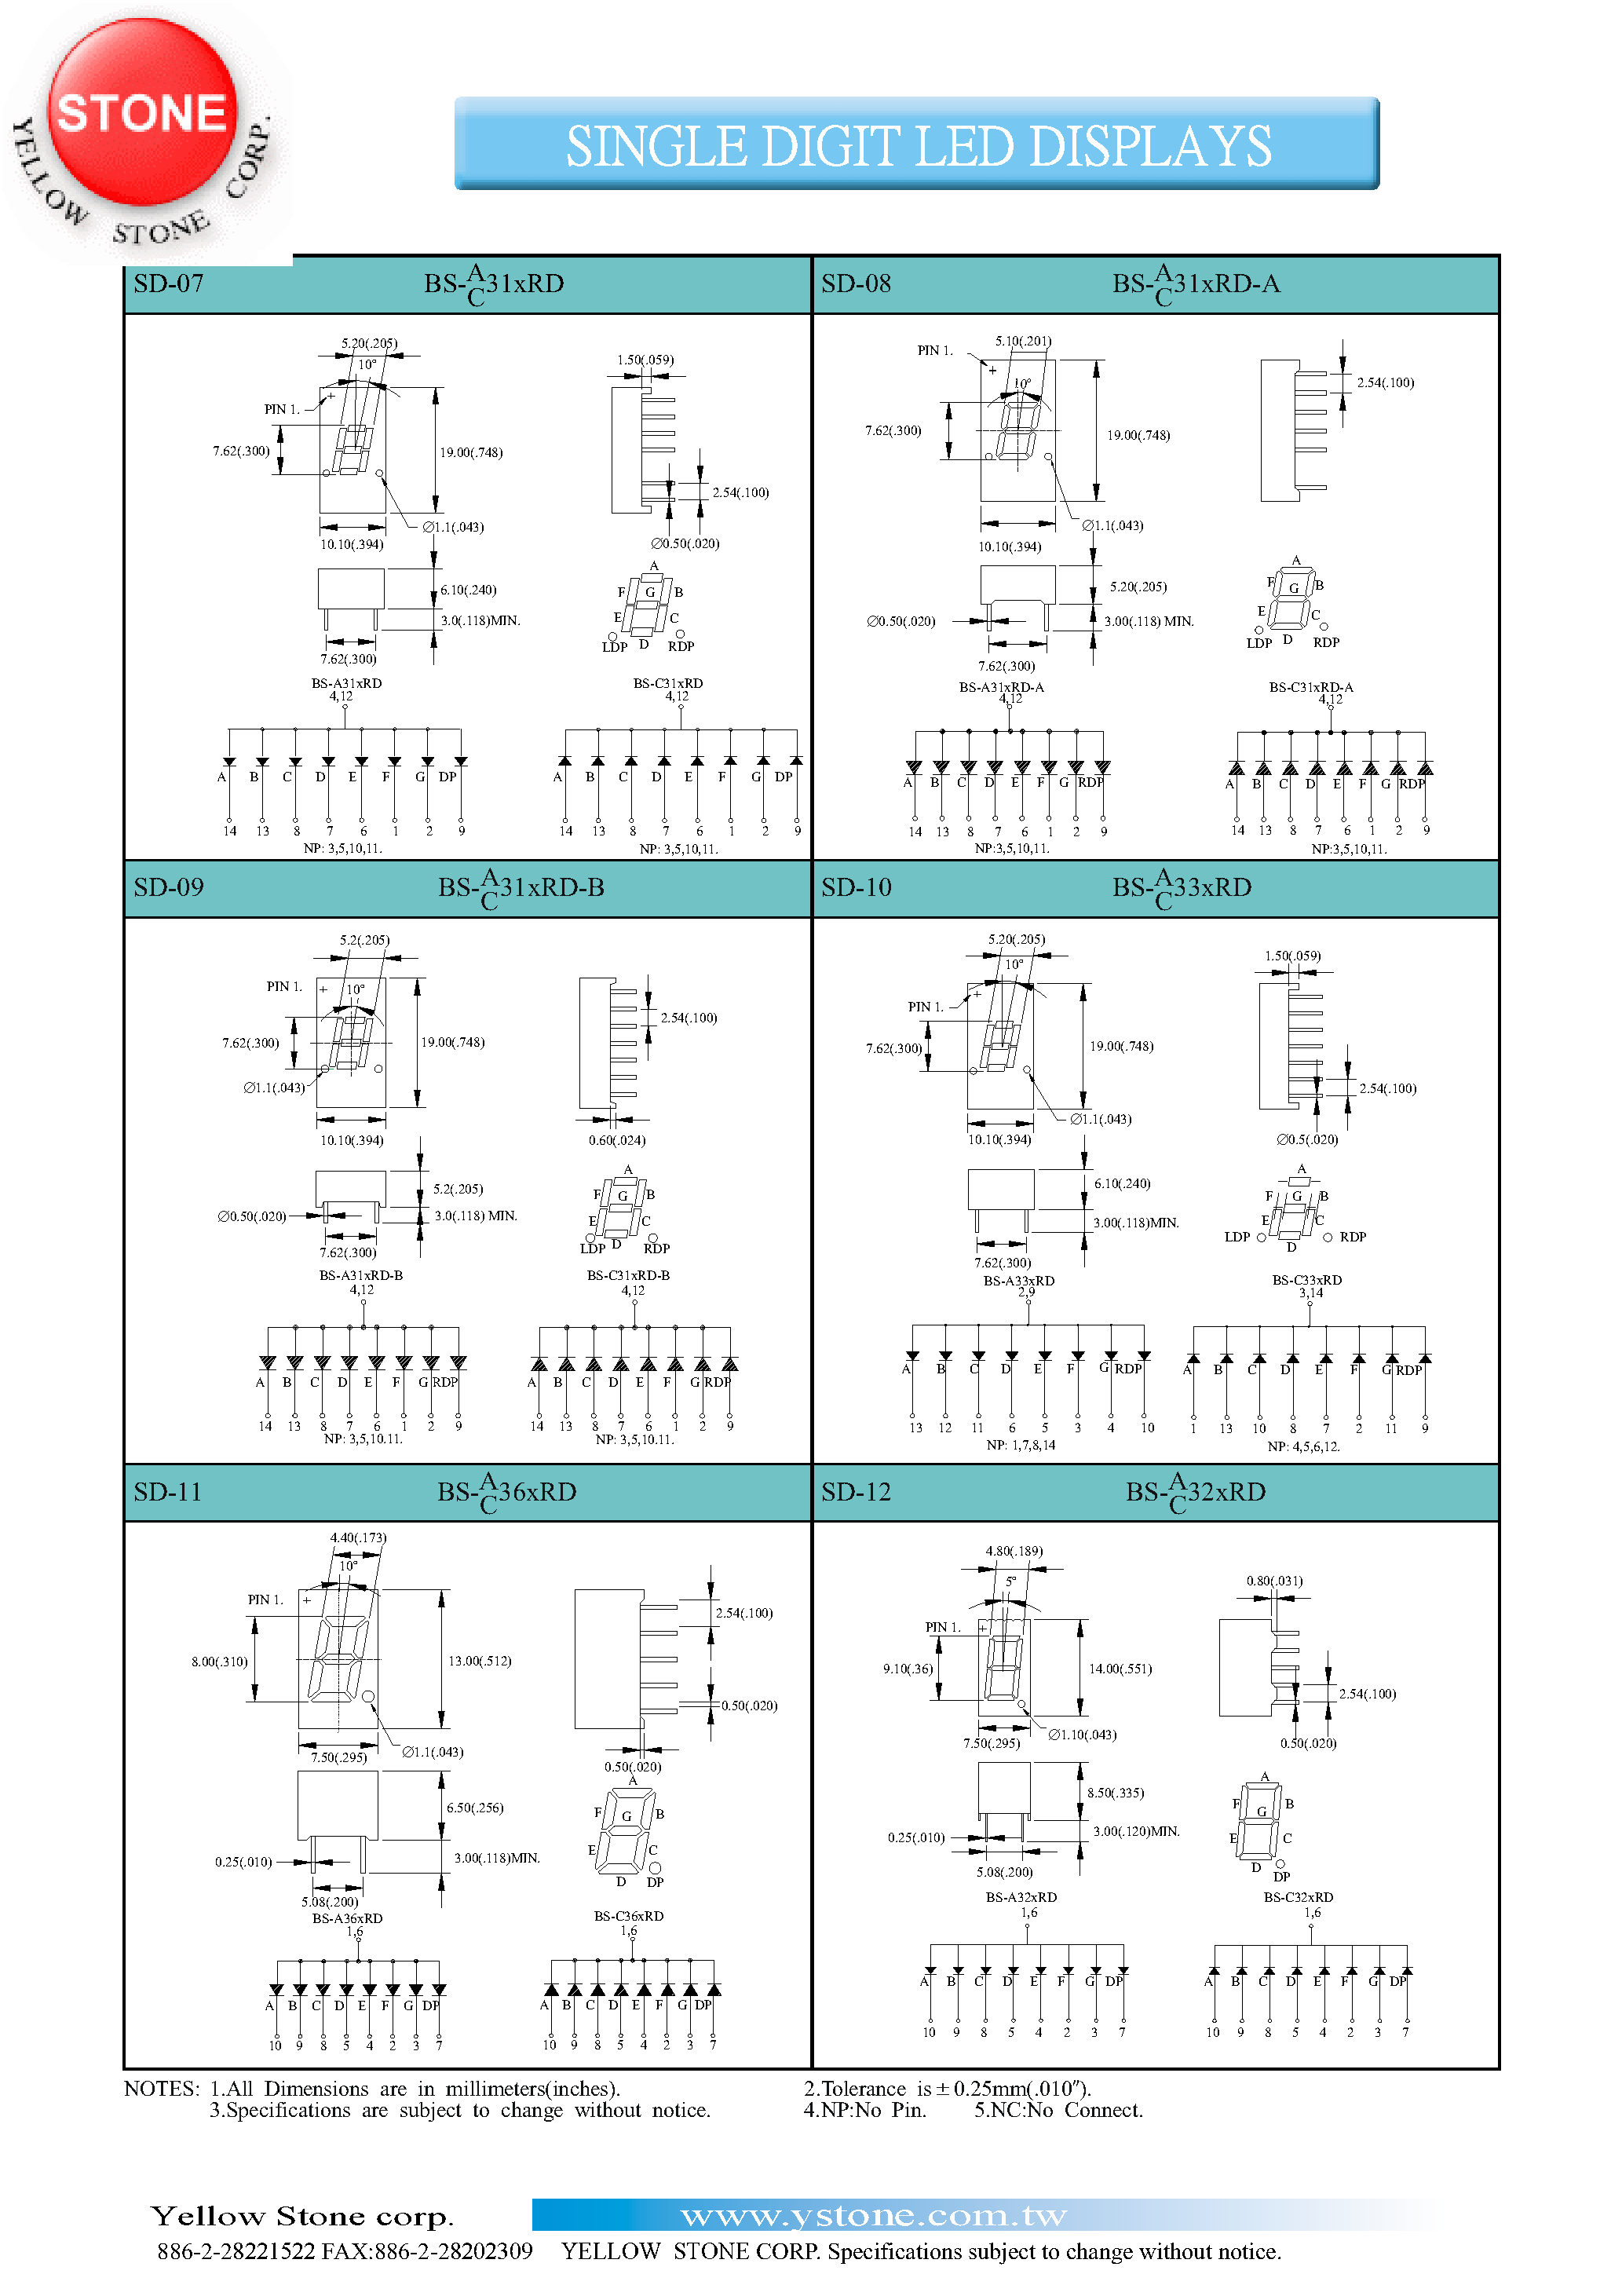 Datasheet BS-A314RD-B - SINGLE DIGIT LED DISPLAYS page 2